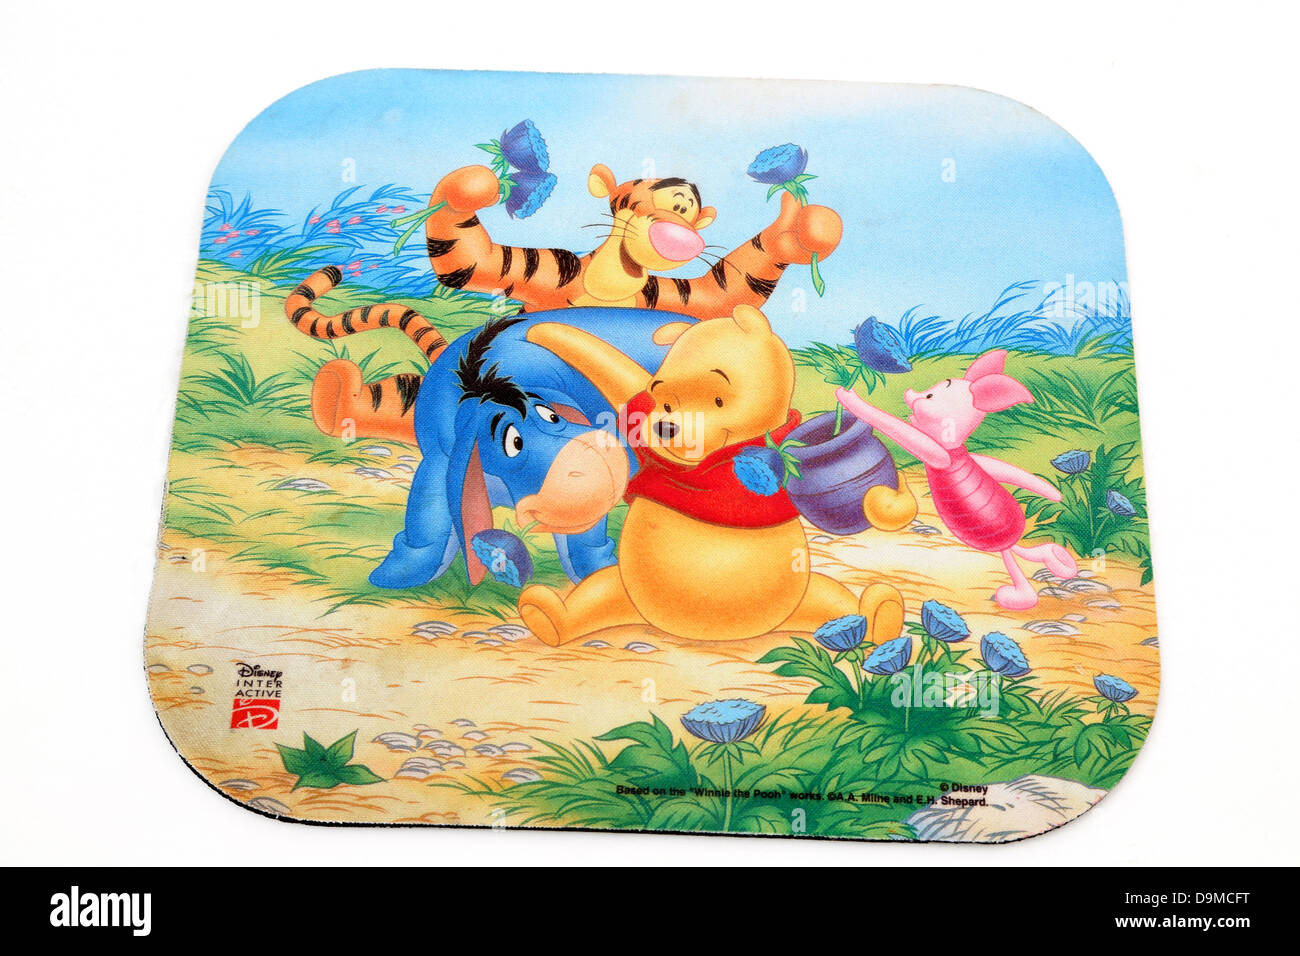 Winnie The Pooh Mousemat Stock Photo